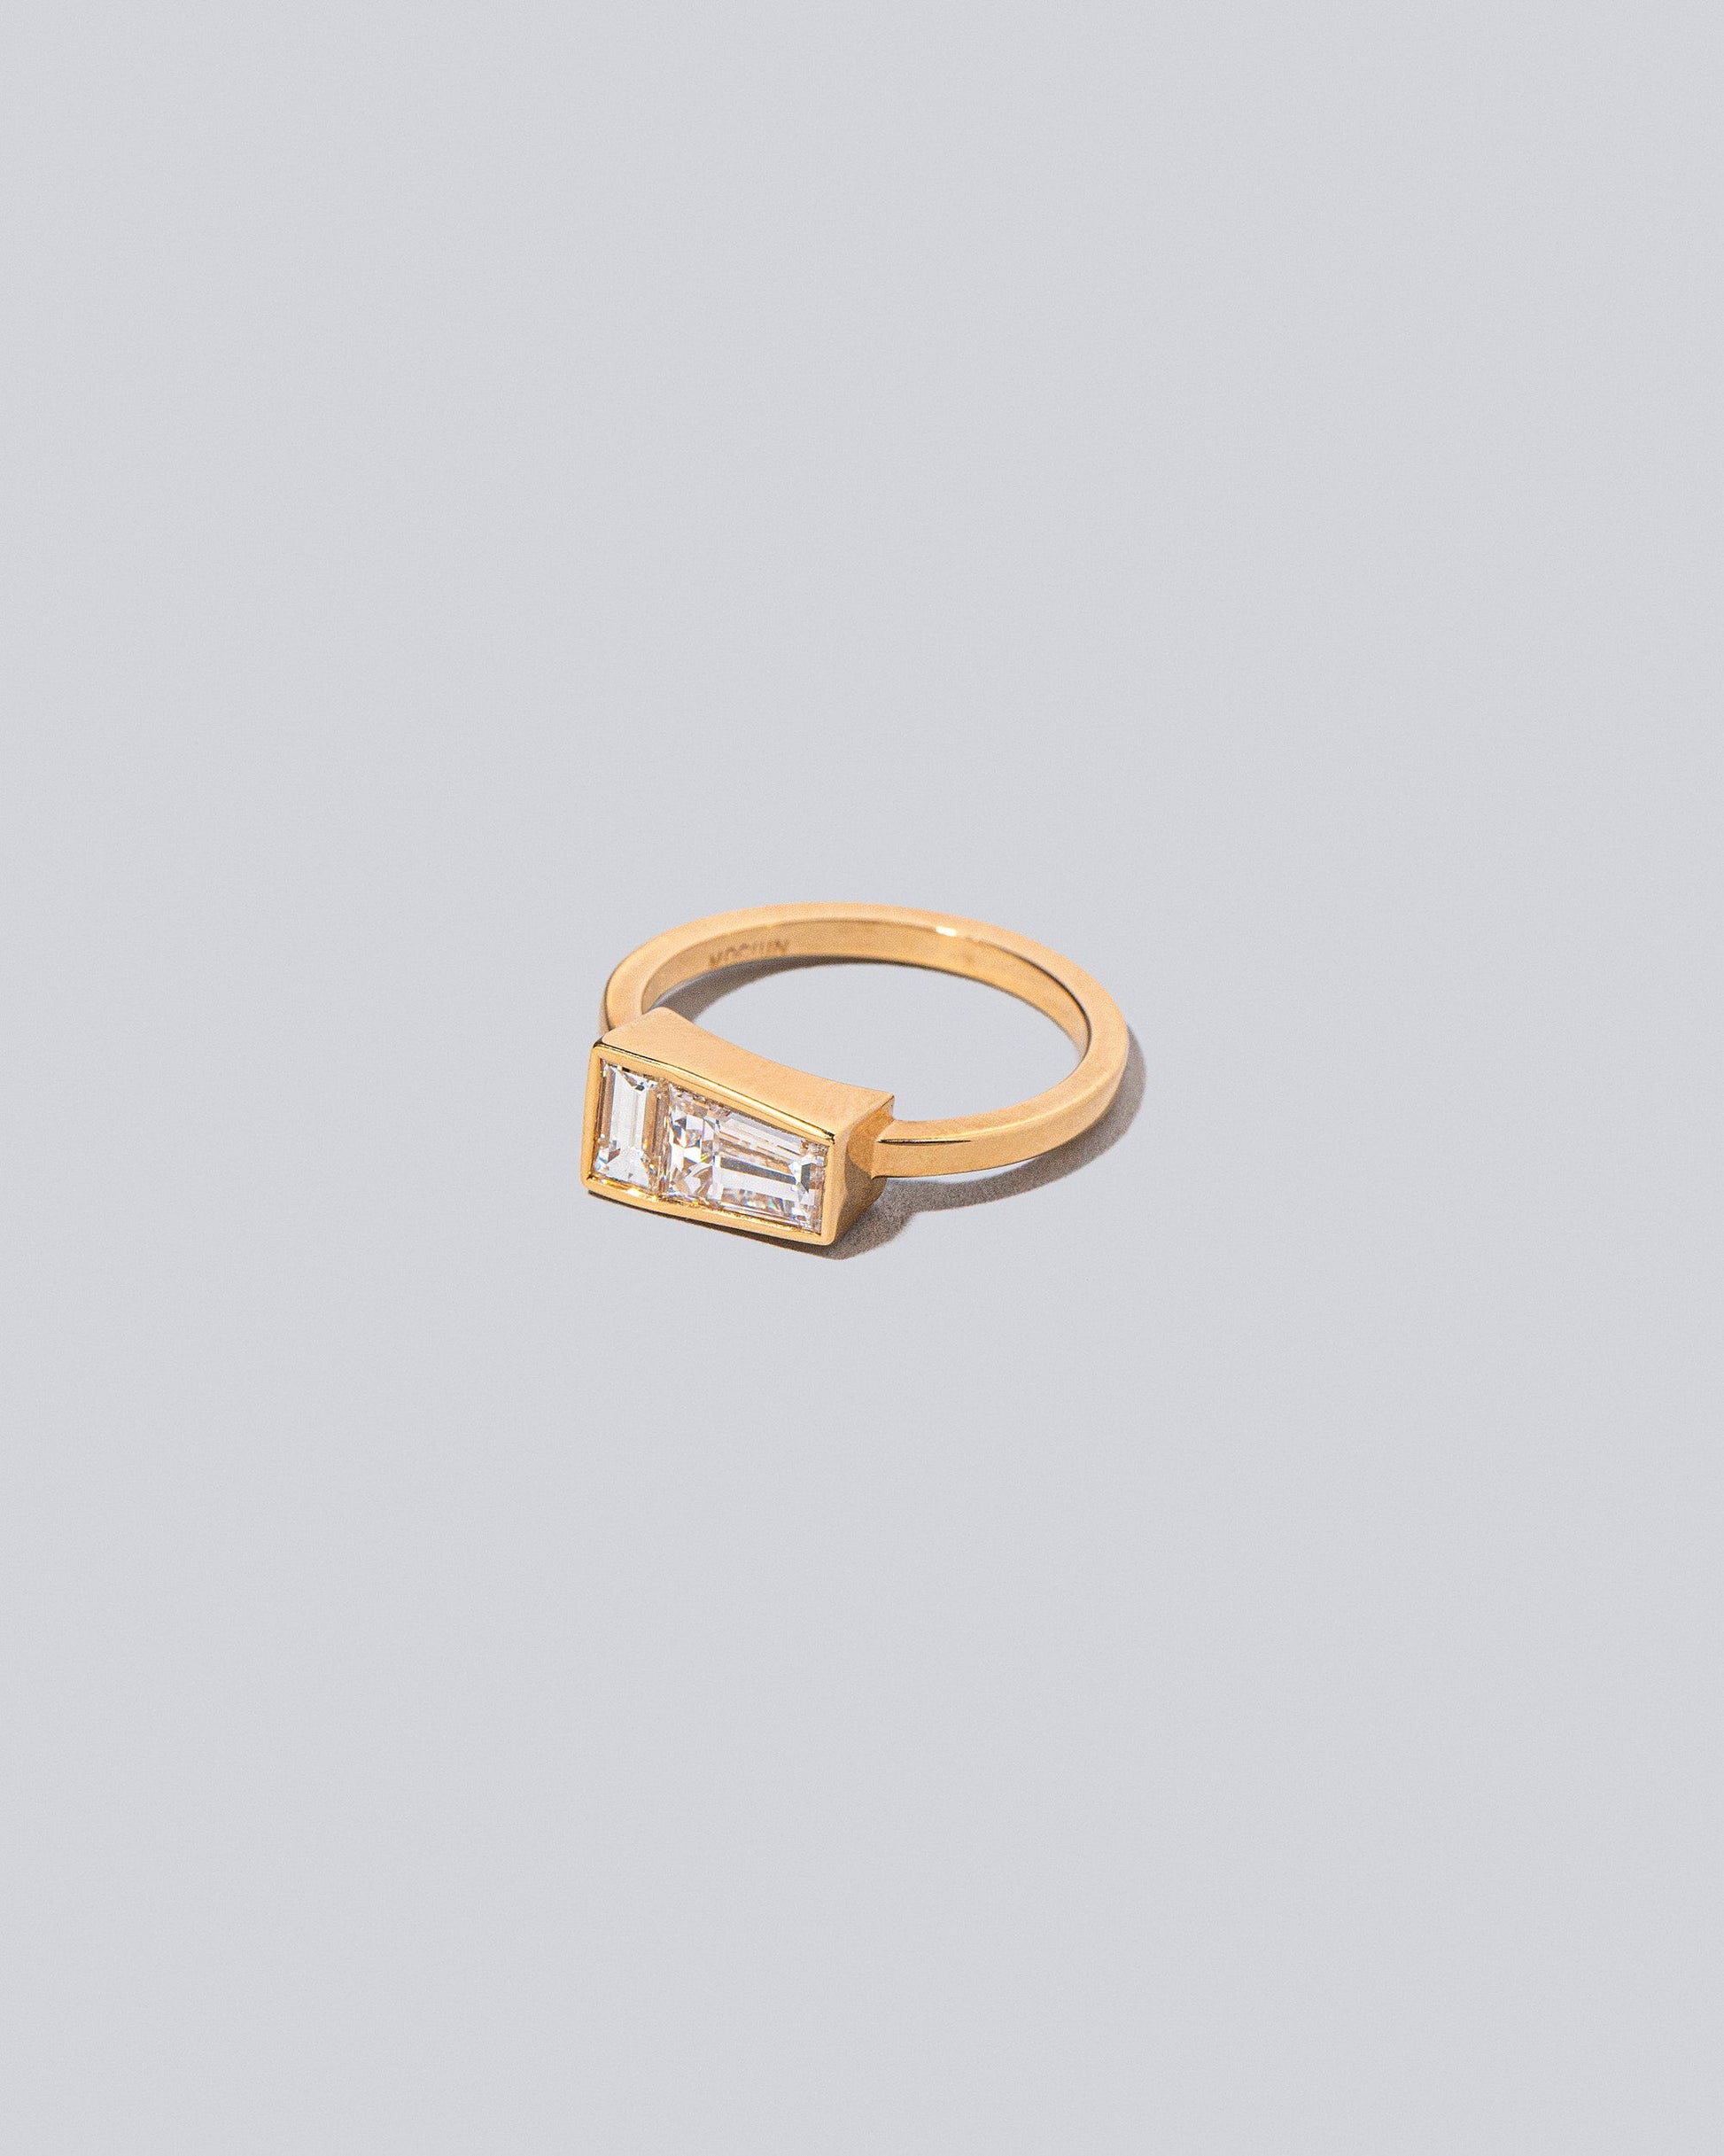 Product photo of the Ode Ring on light light color background.